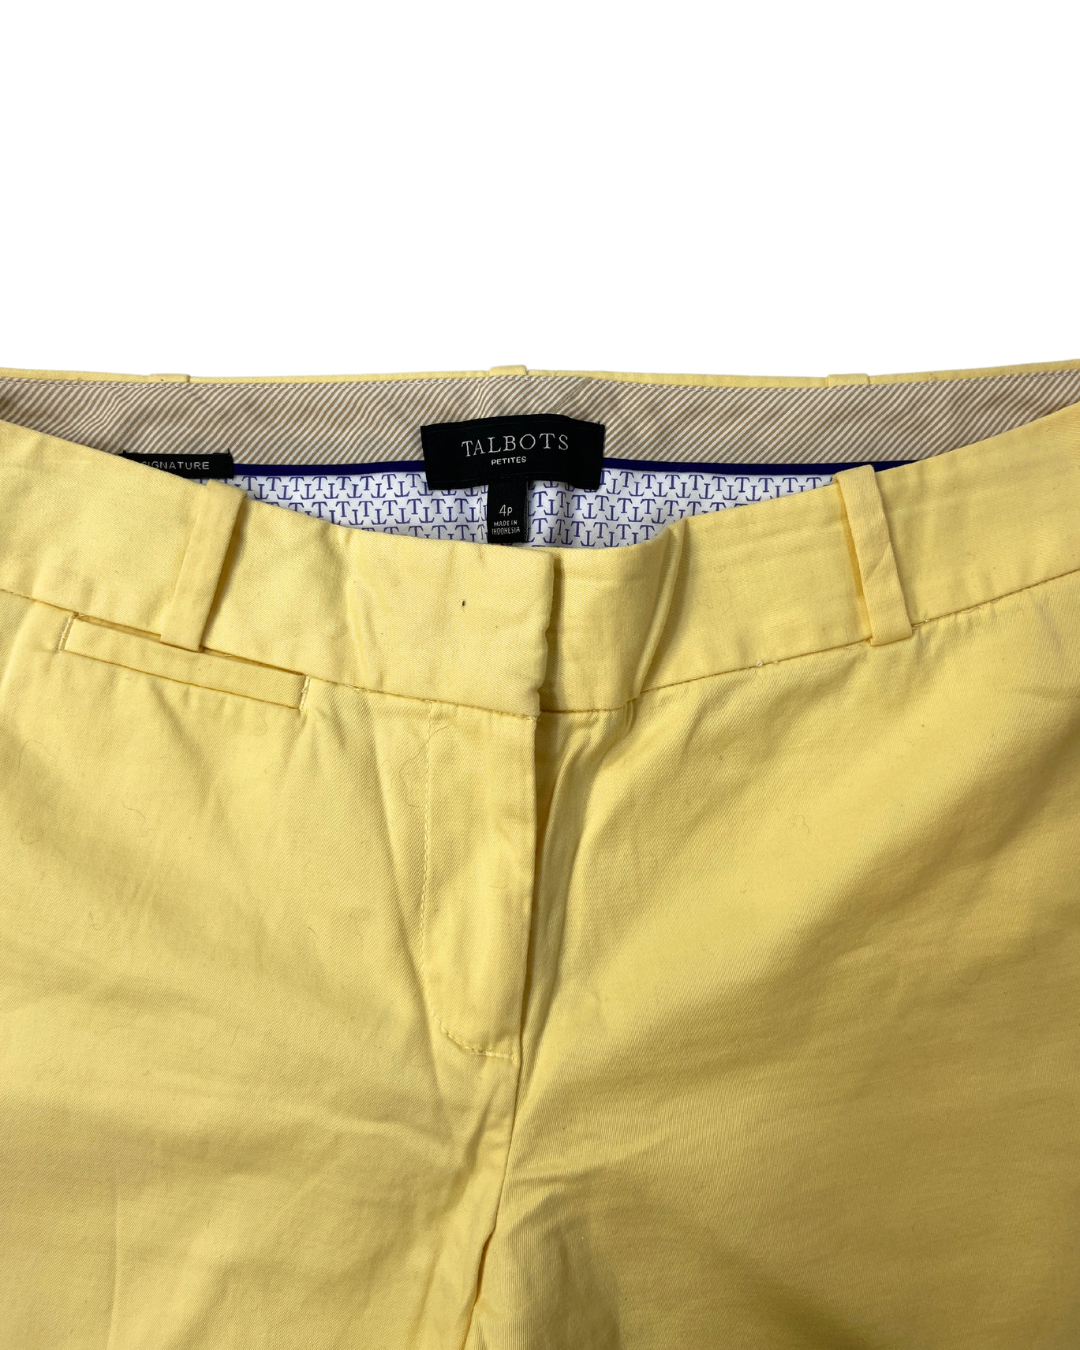 Talbots Yellow Trousers